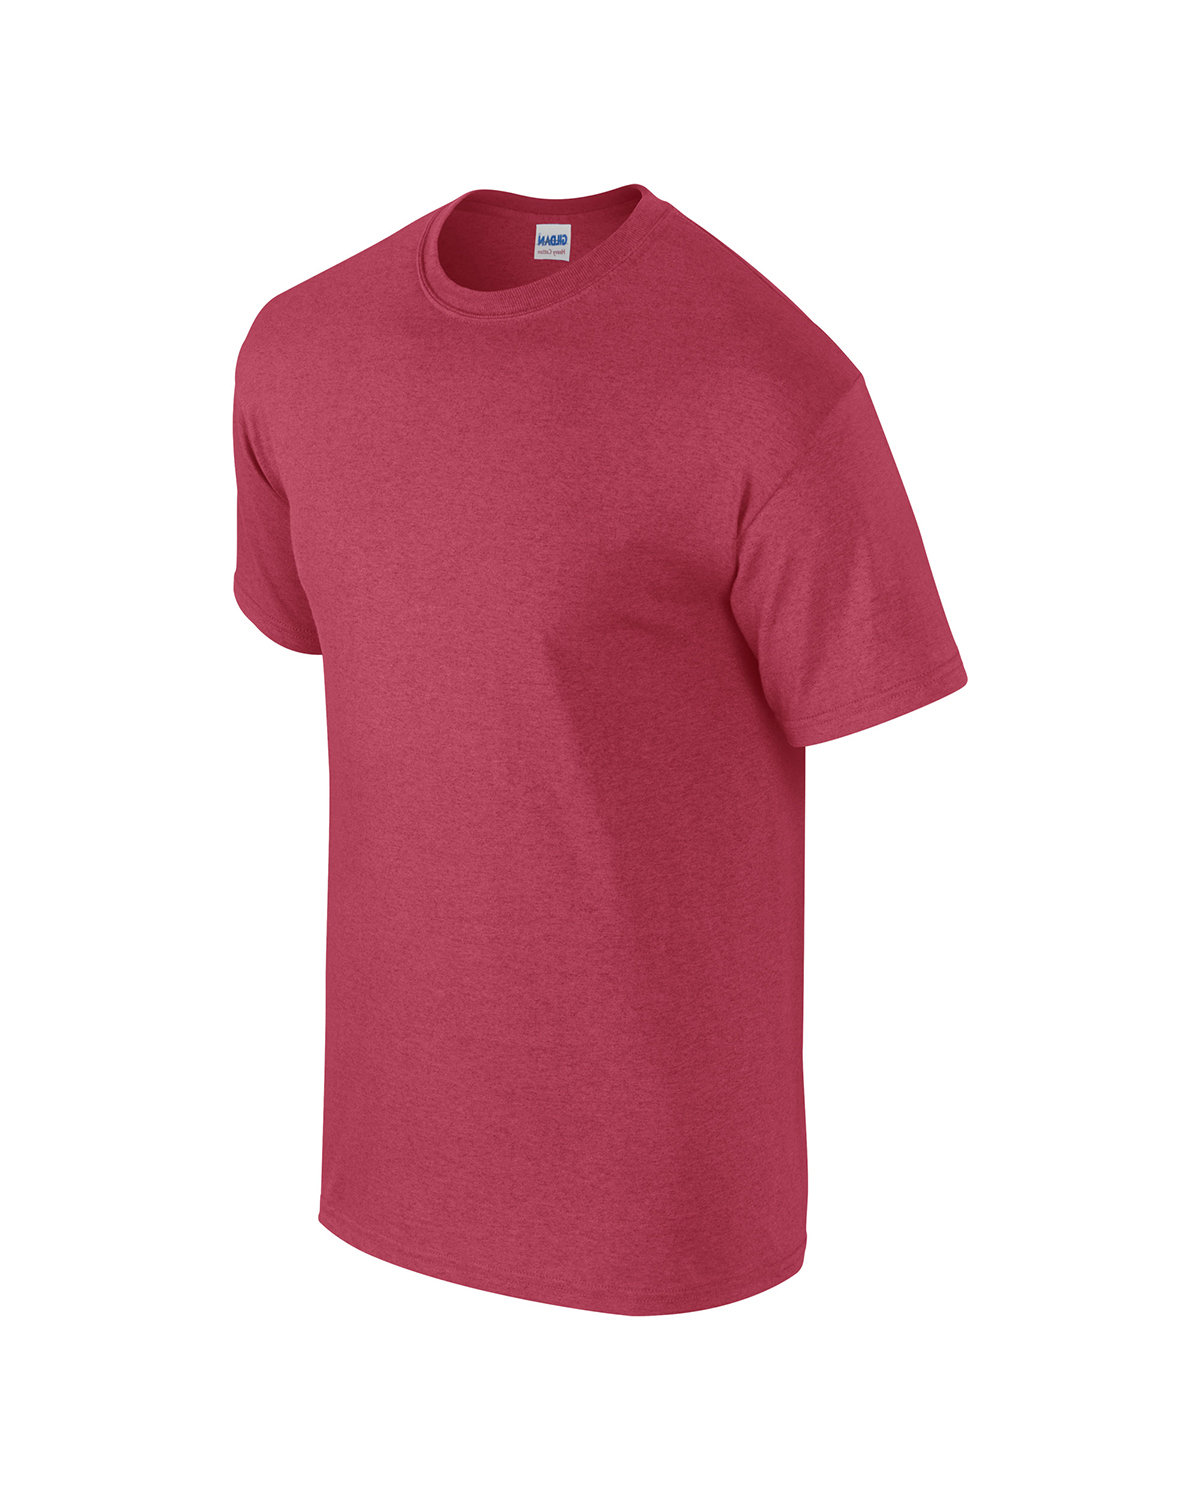 Buy Zivosis Women Red, Maroon, Pink Cotton Blend Pack Of 3 T-Shirt